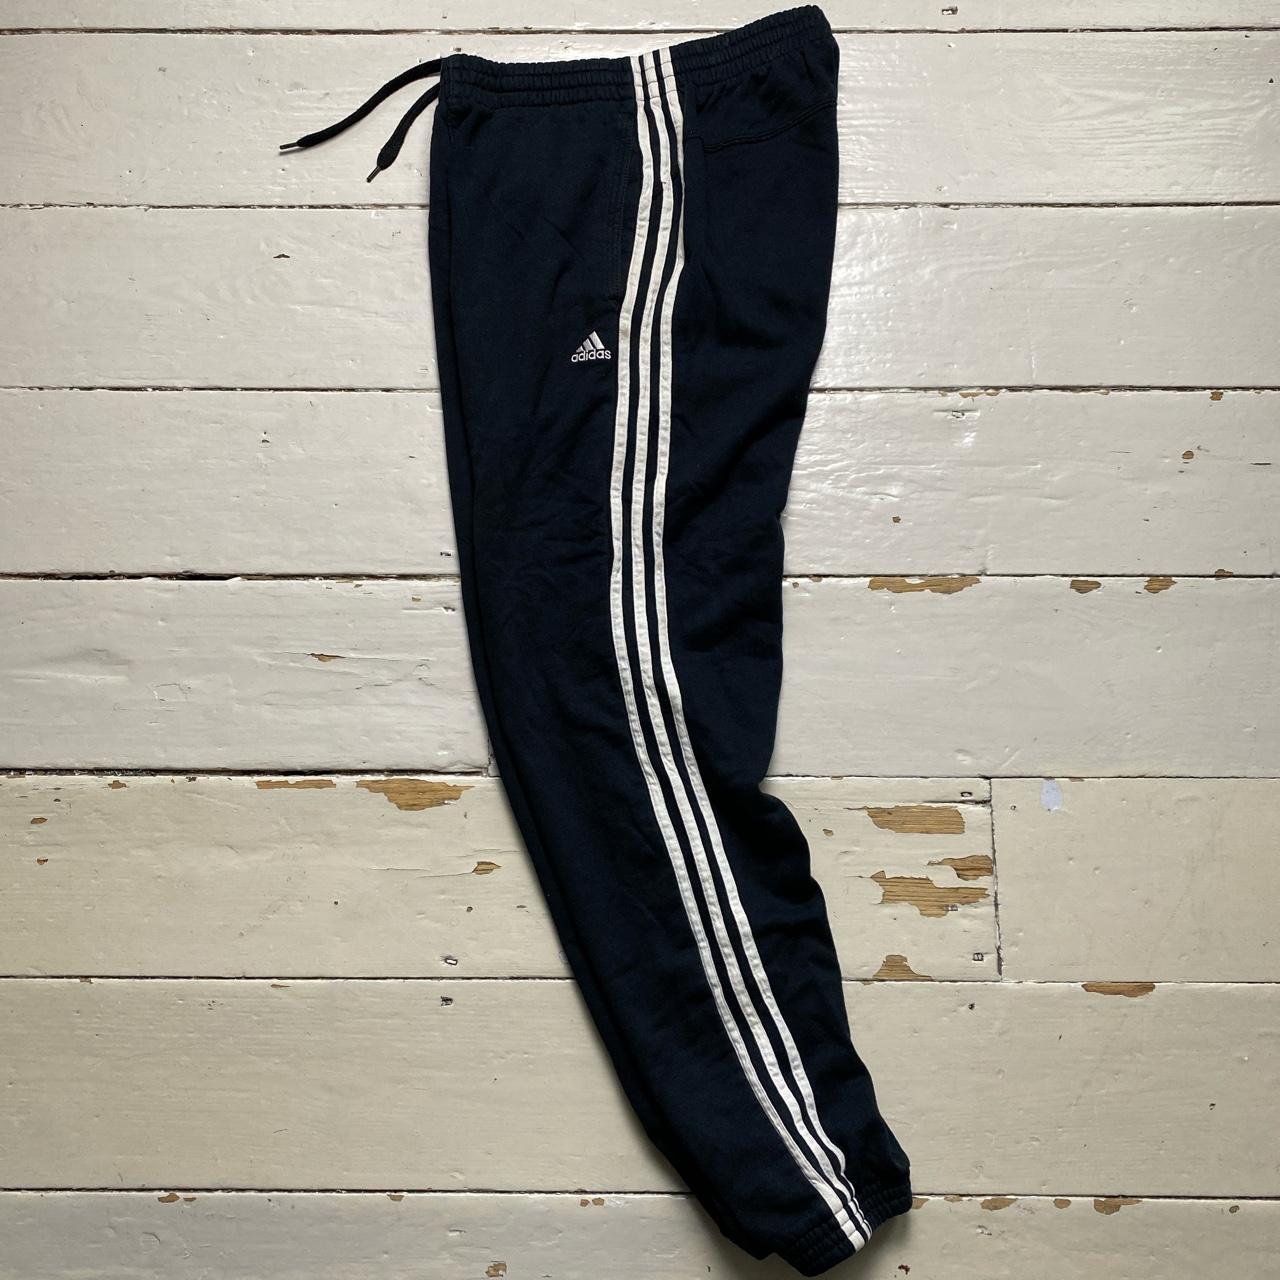 Adidas Performance Essentials Joggers Black and White